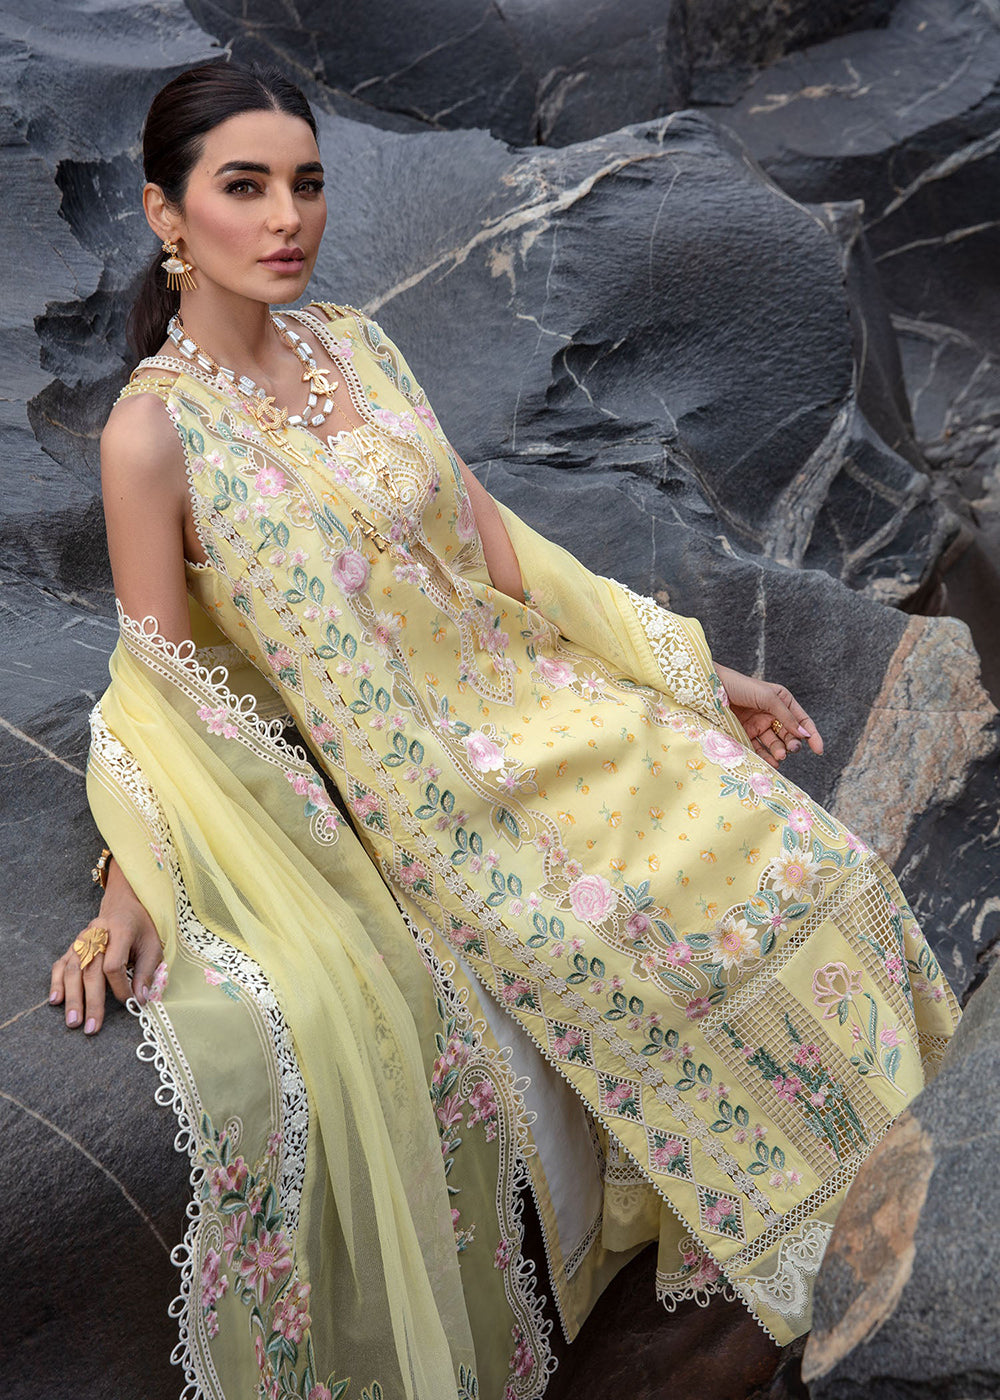 Buy Now Luxury Lawn '24 by Crimson | Believe In Her - Topaz Yellow Online at Empress in USA, UK, Canada, Germany, Italy, Dubai & Worldwide at Empress Clothing. 